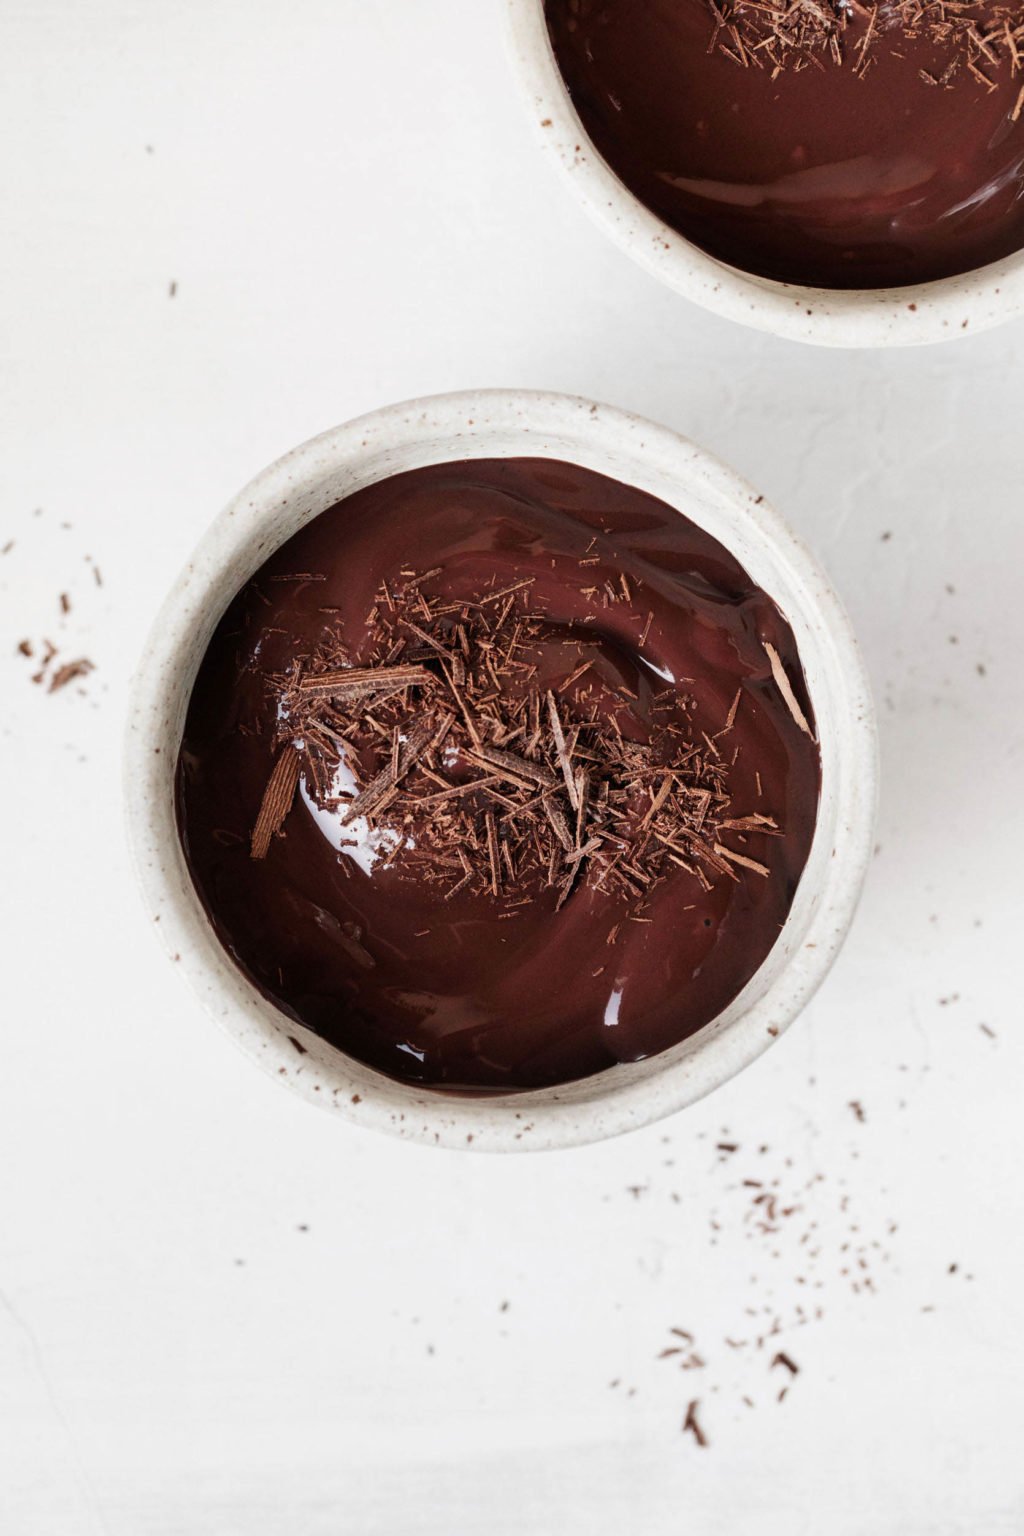 An overhead image of two small, ceramic bowls that are filled with a luscious, chocolate mixture. They rest on a white surface.